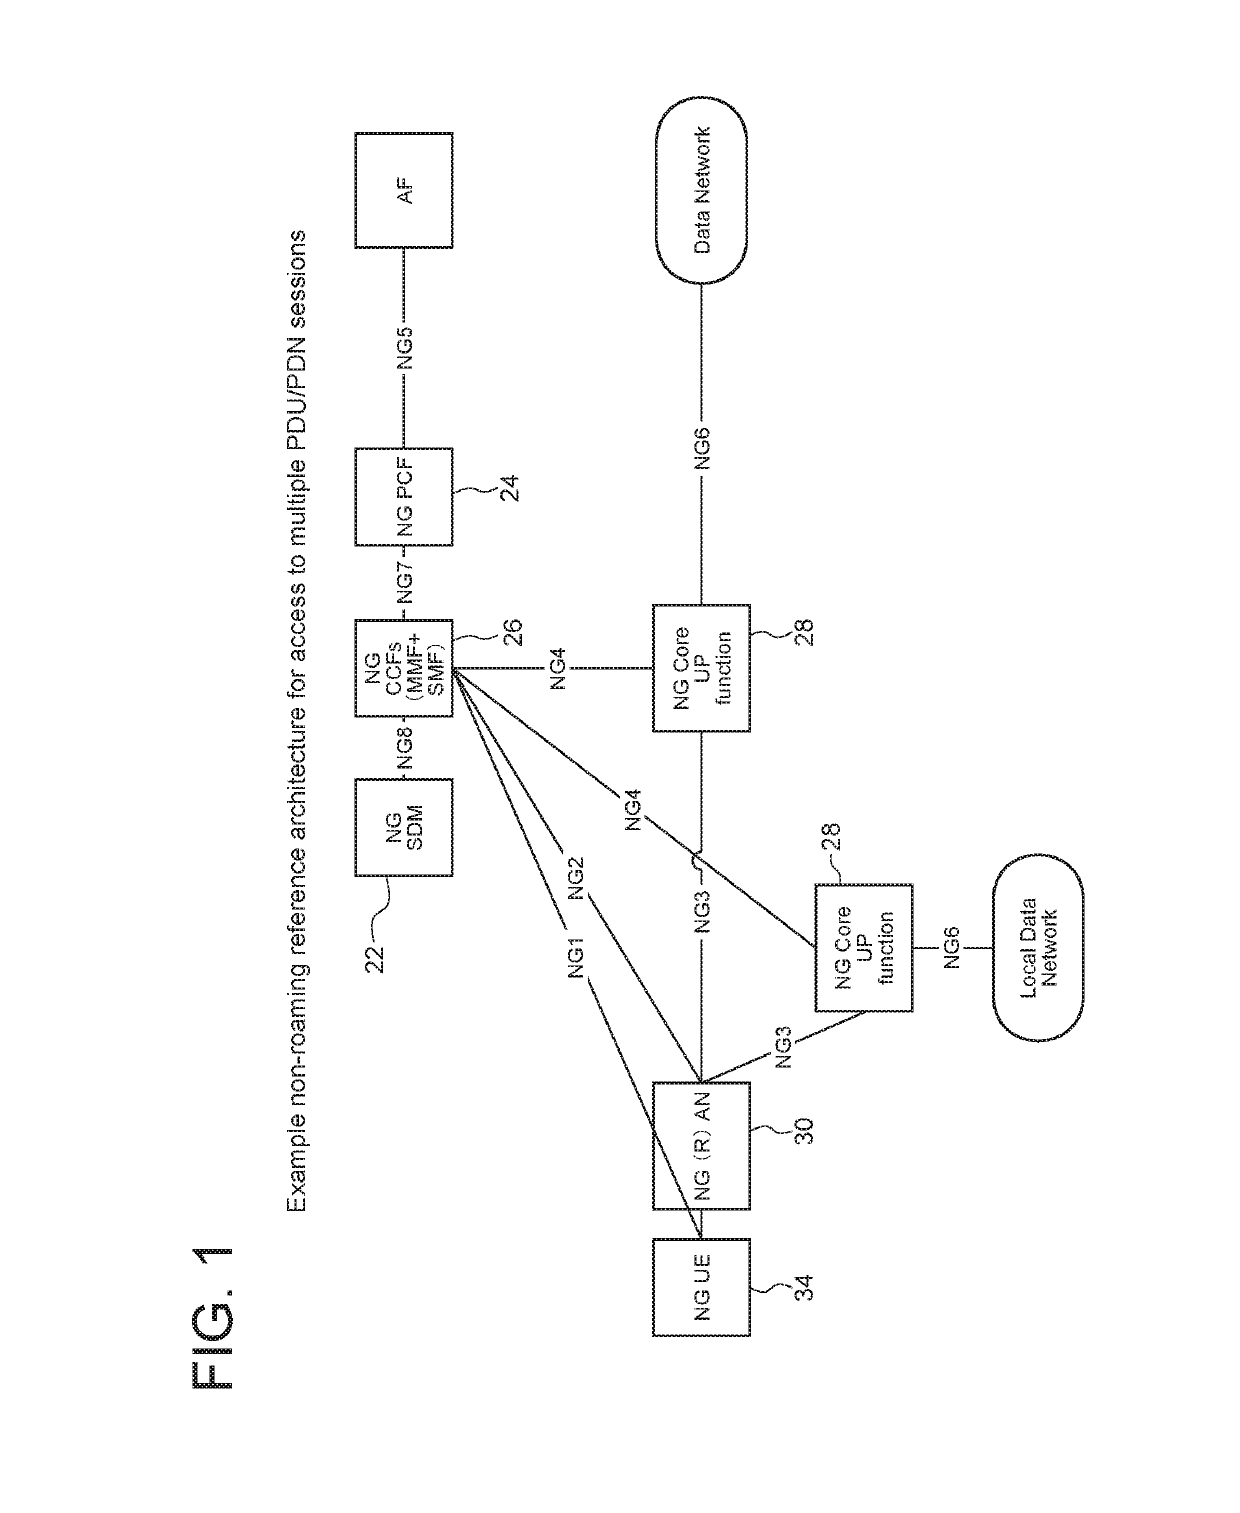 Method for user plane connection activation or deactivation per session